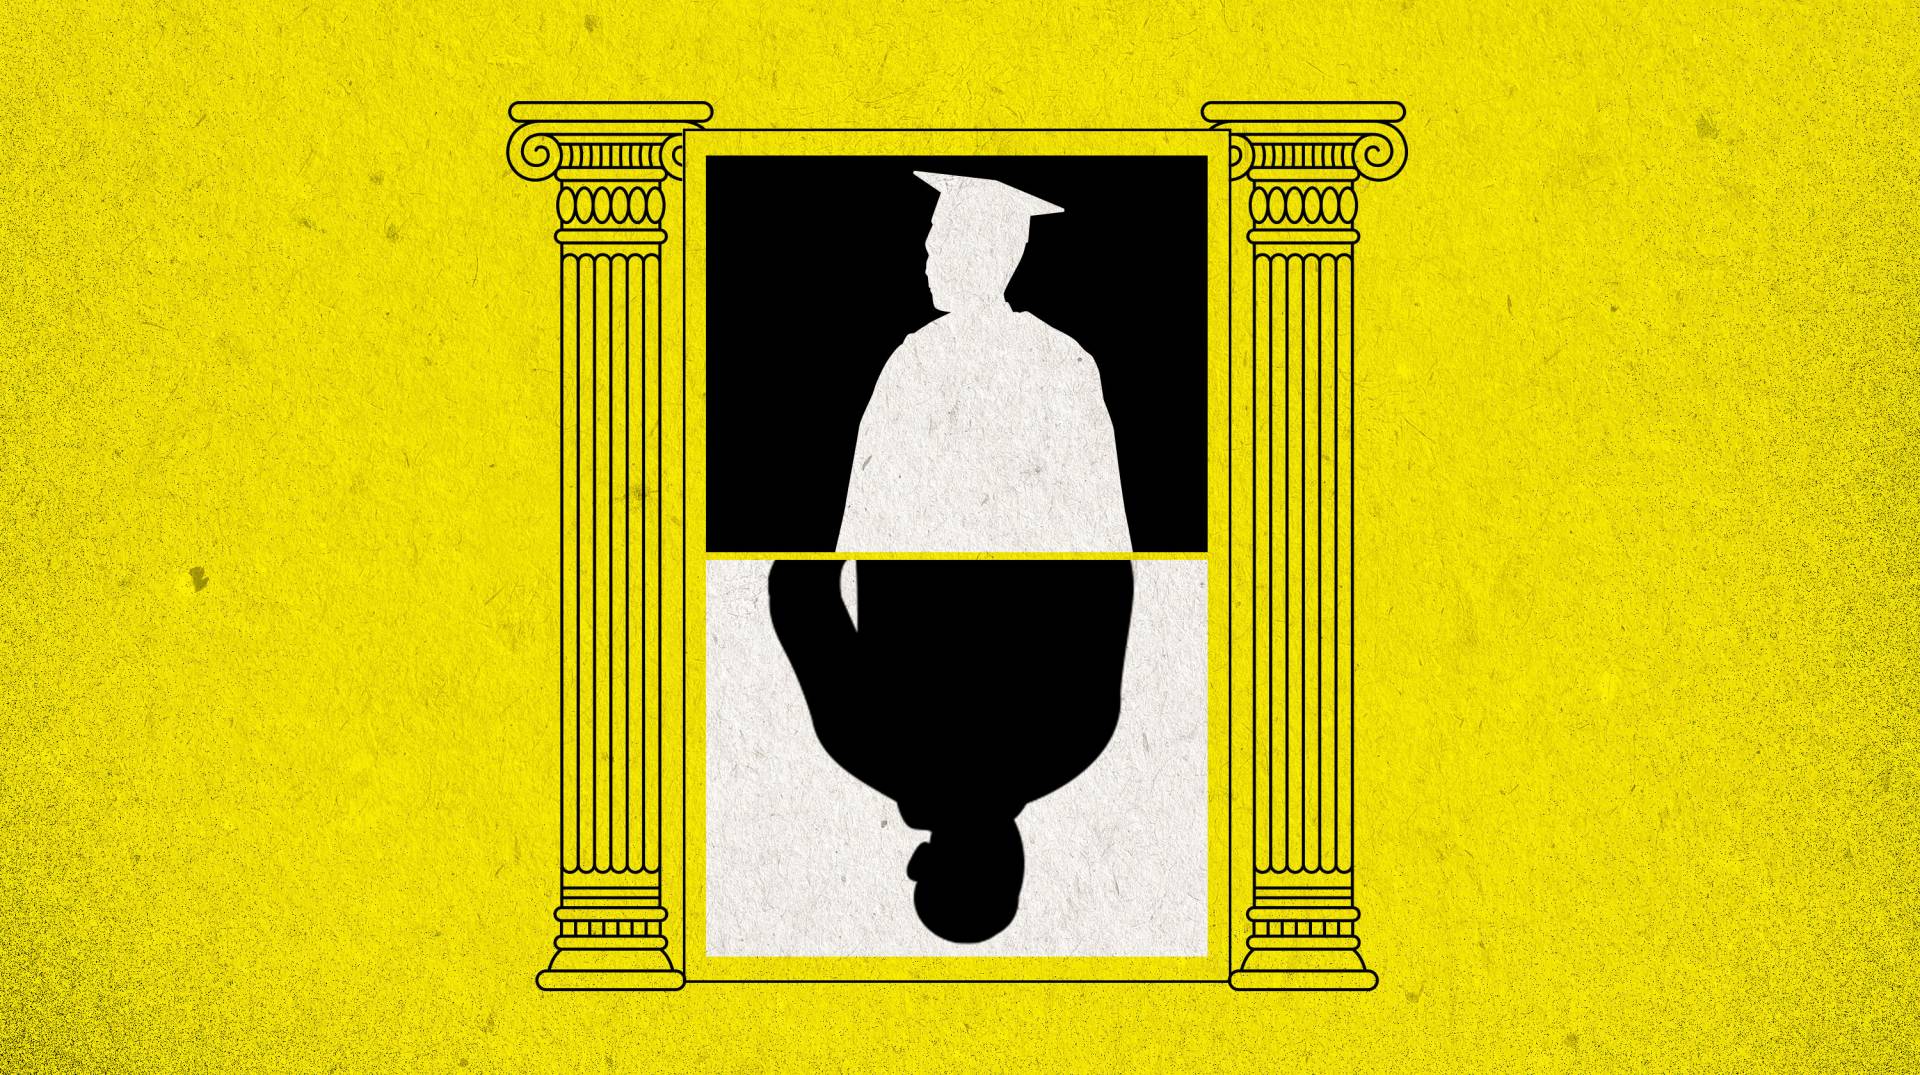 Illustration of silhouette of a graduate mirrored, flanked by Ionic columns